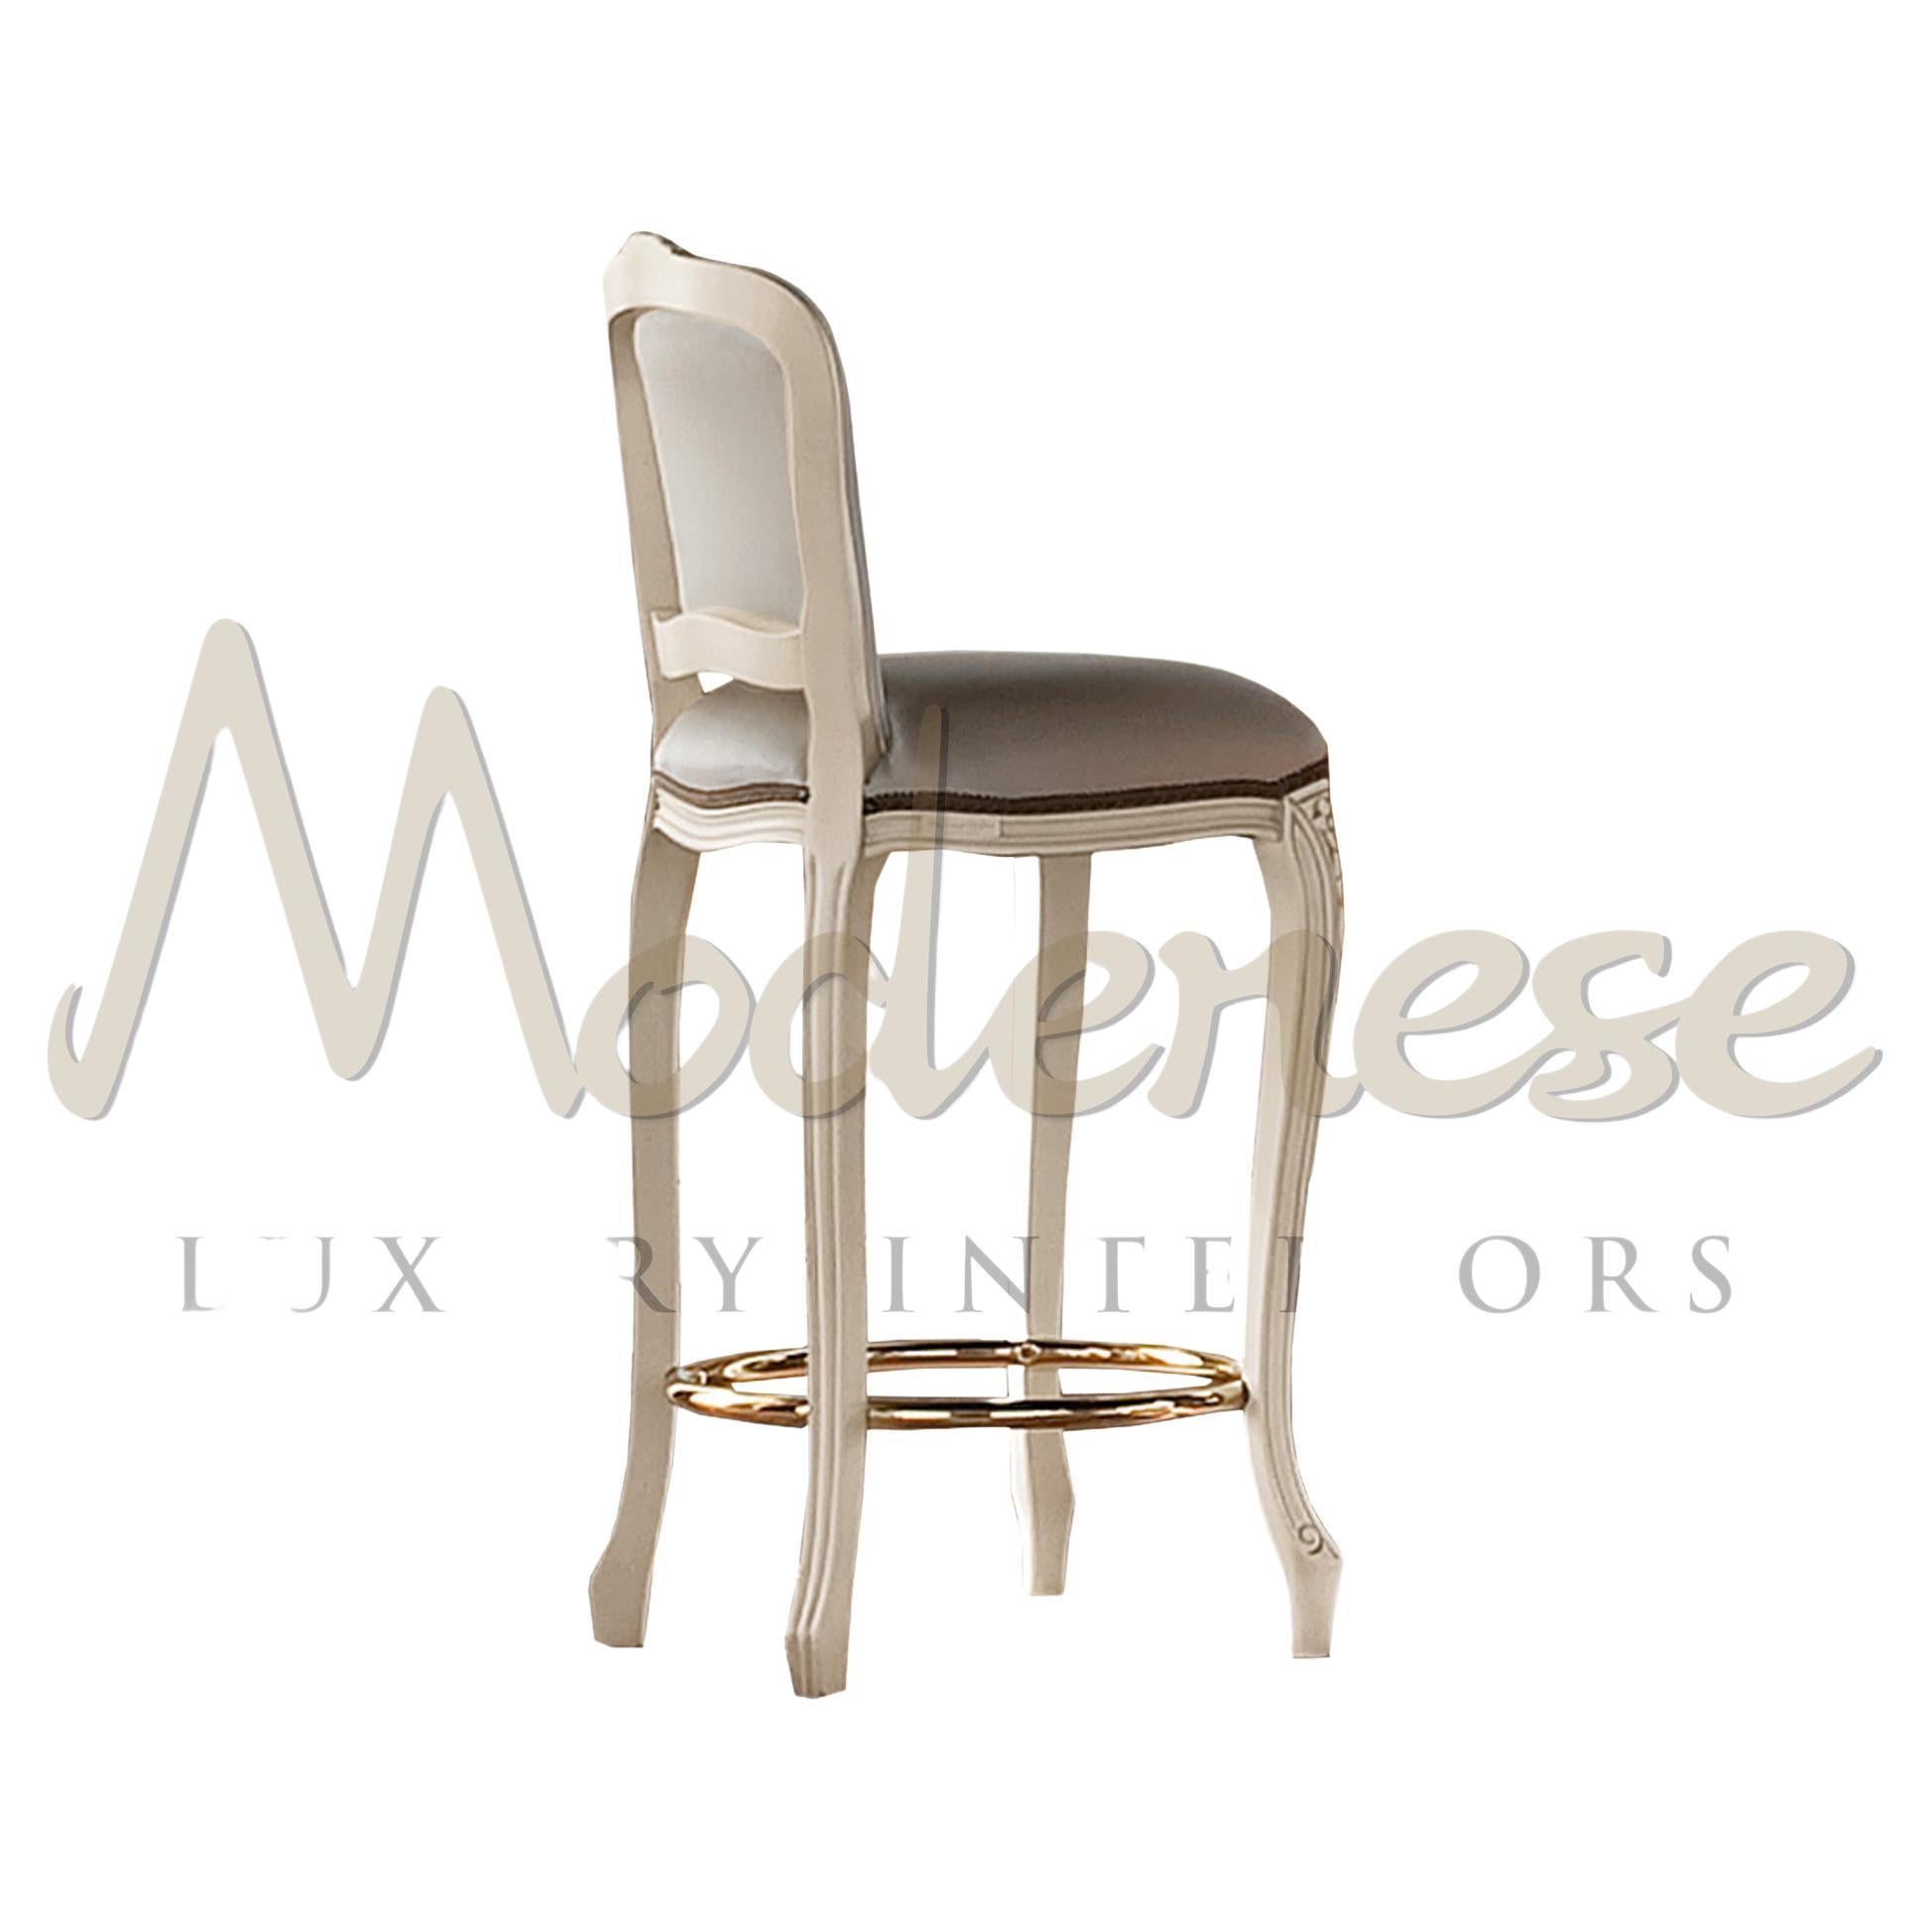 Lavish neoclassical bar stool in bright ivory finish and antiqued polishing with grey fabric upholstery both in the seating and in the backrest, featuring a golden metal round frame. This seating element, which goes best with the Modenese Home Bar